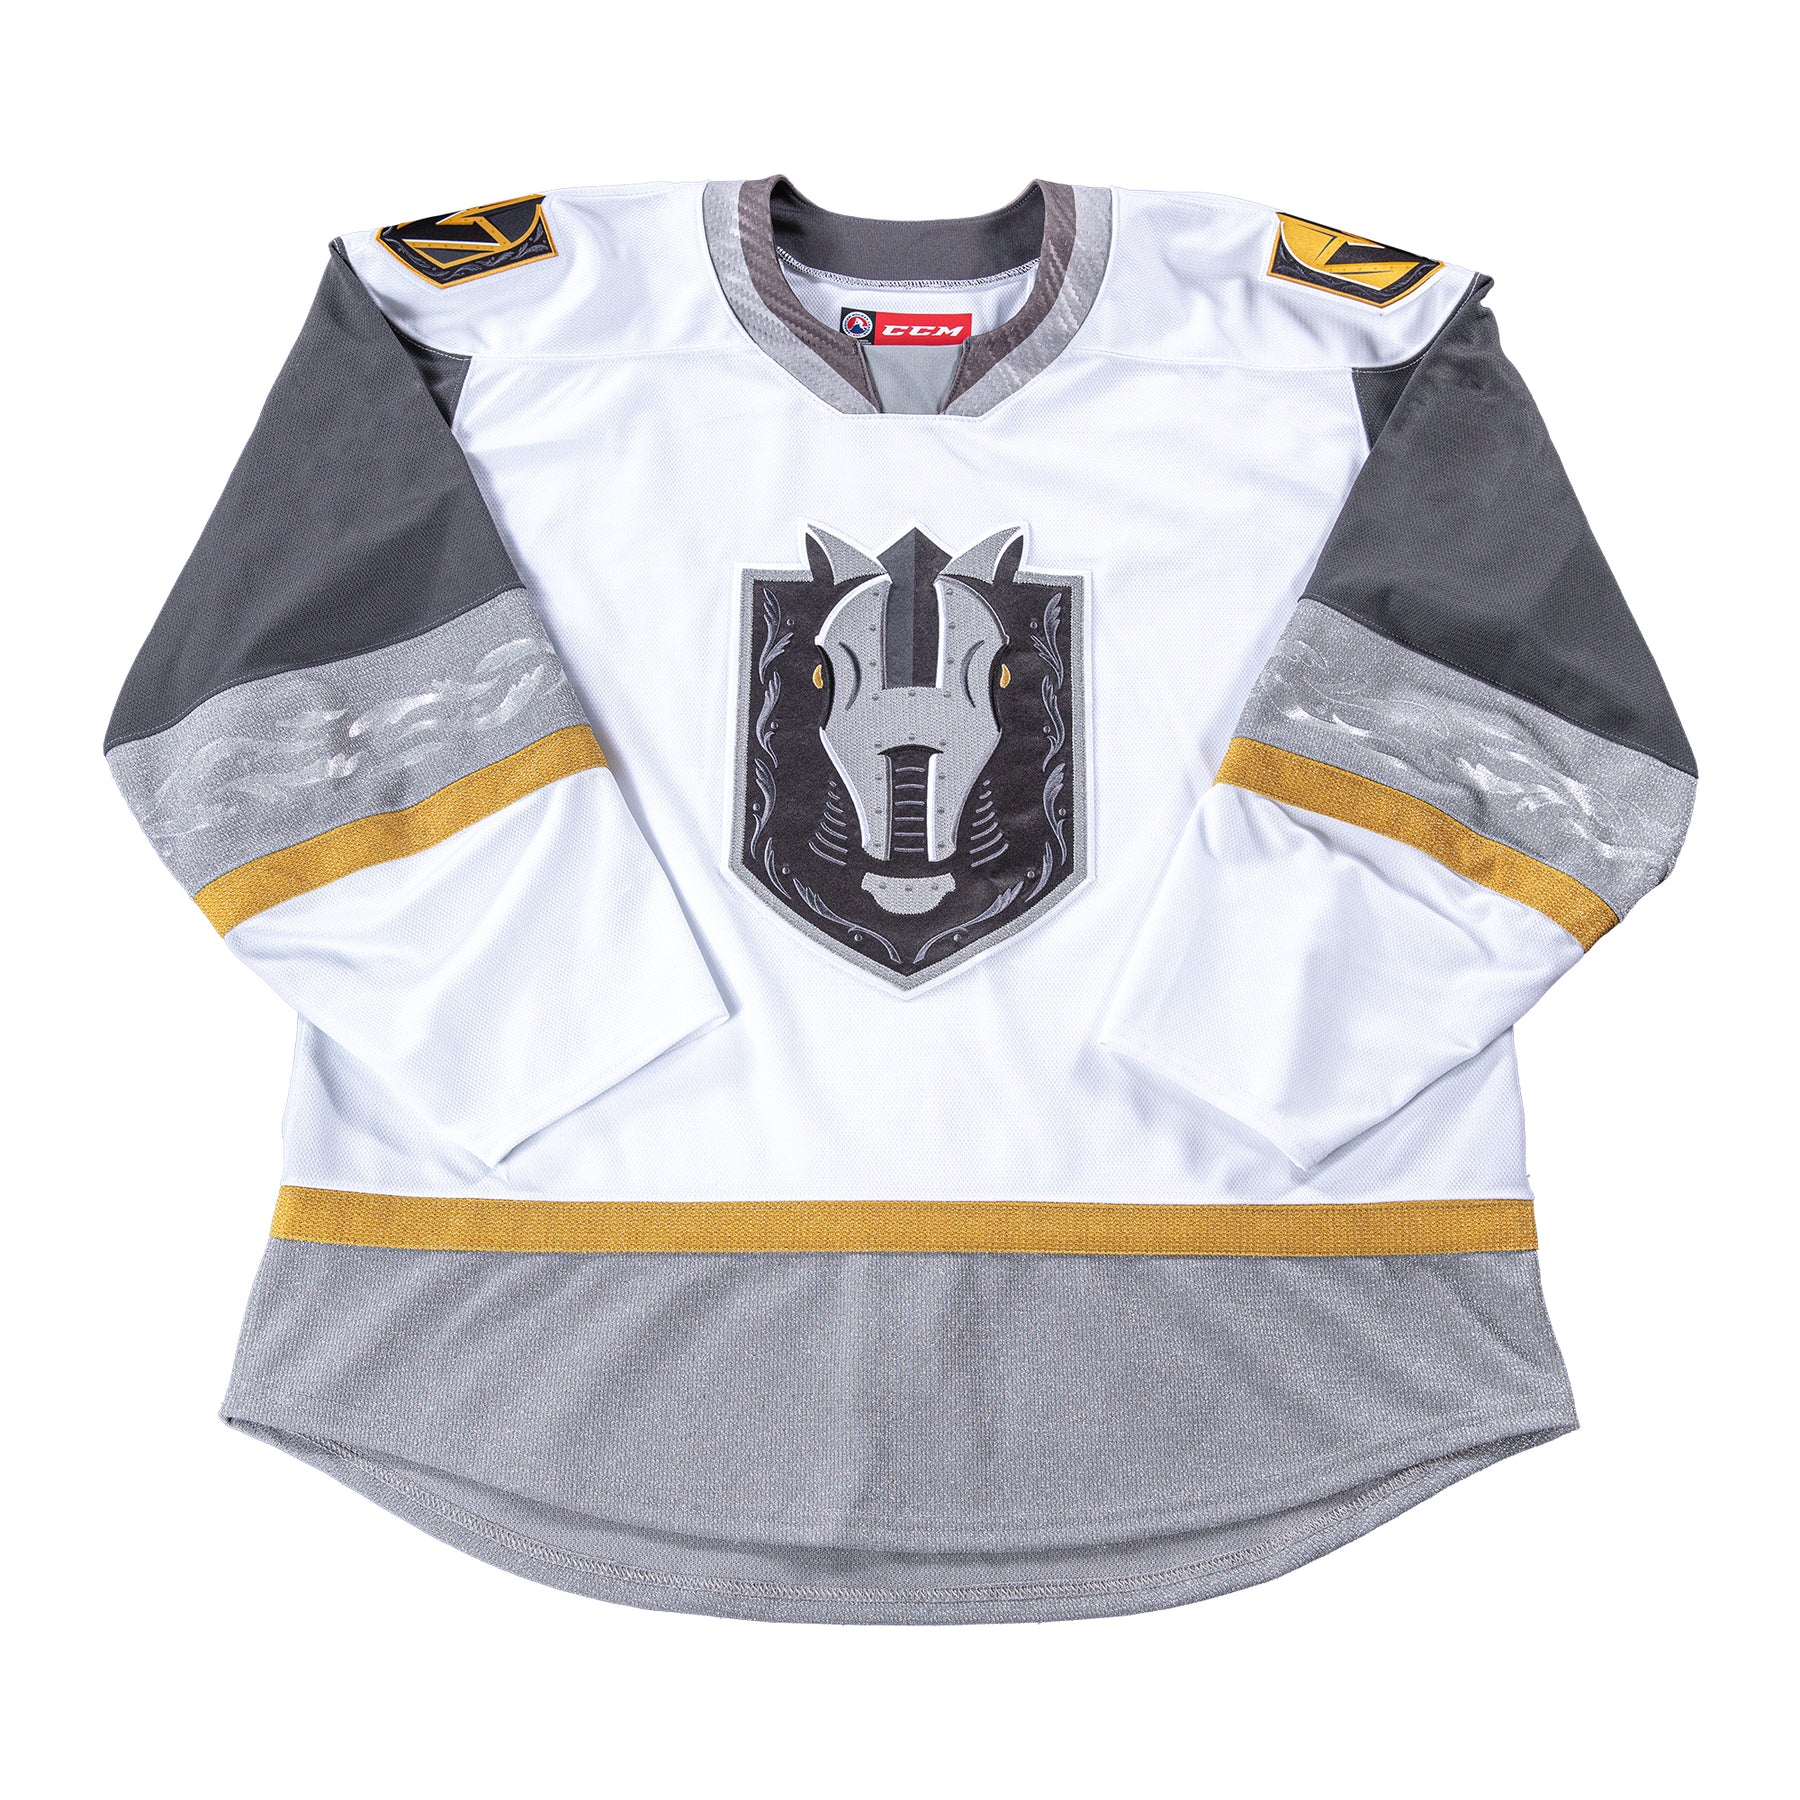 Golden Knights, Silver Knights to debut specialty jerseys for